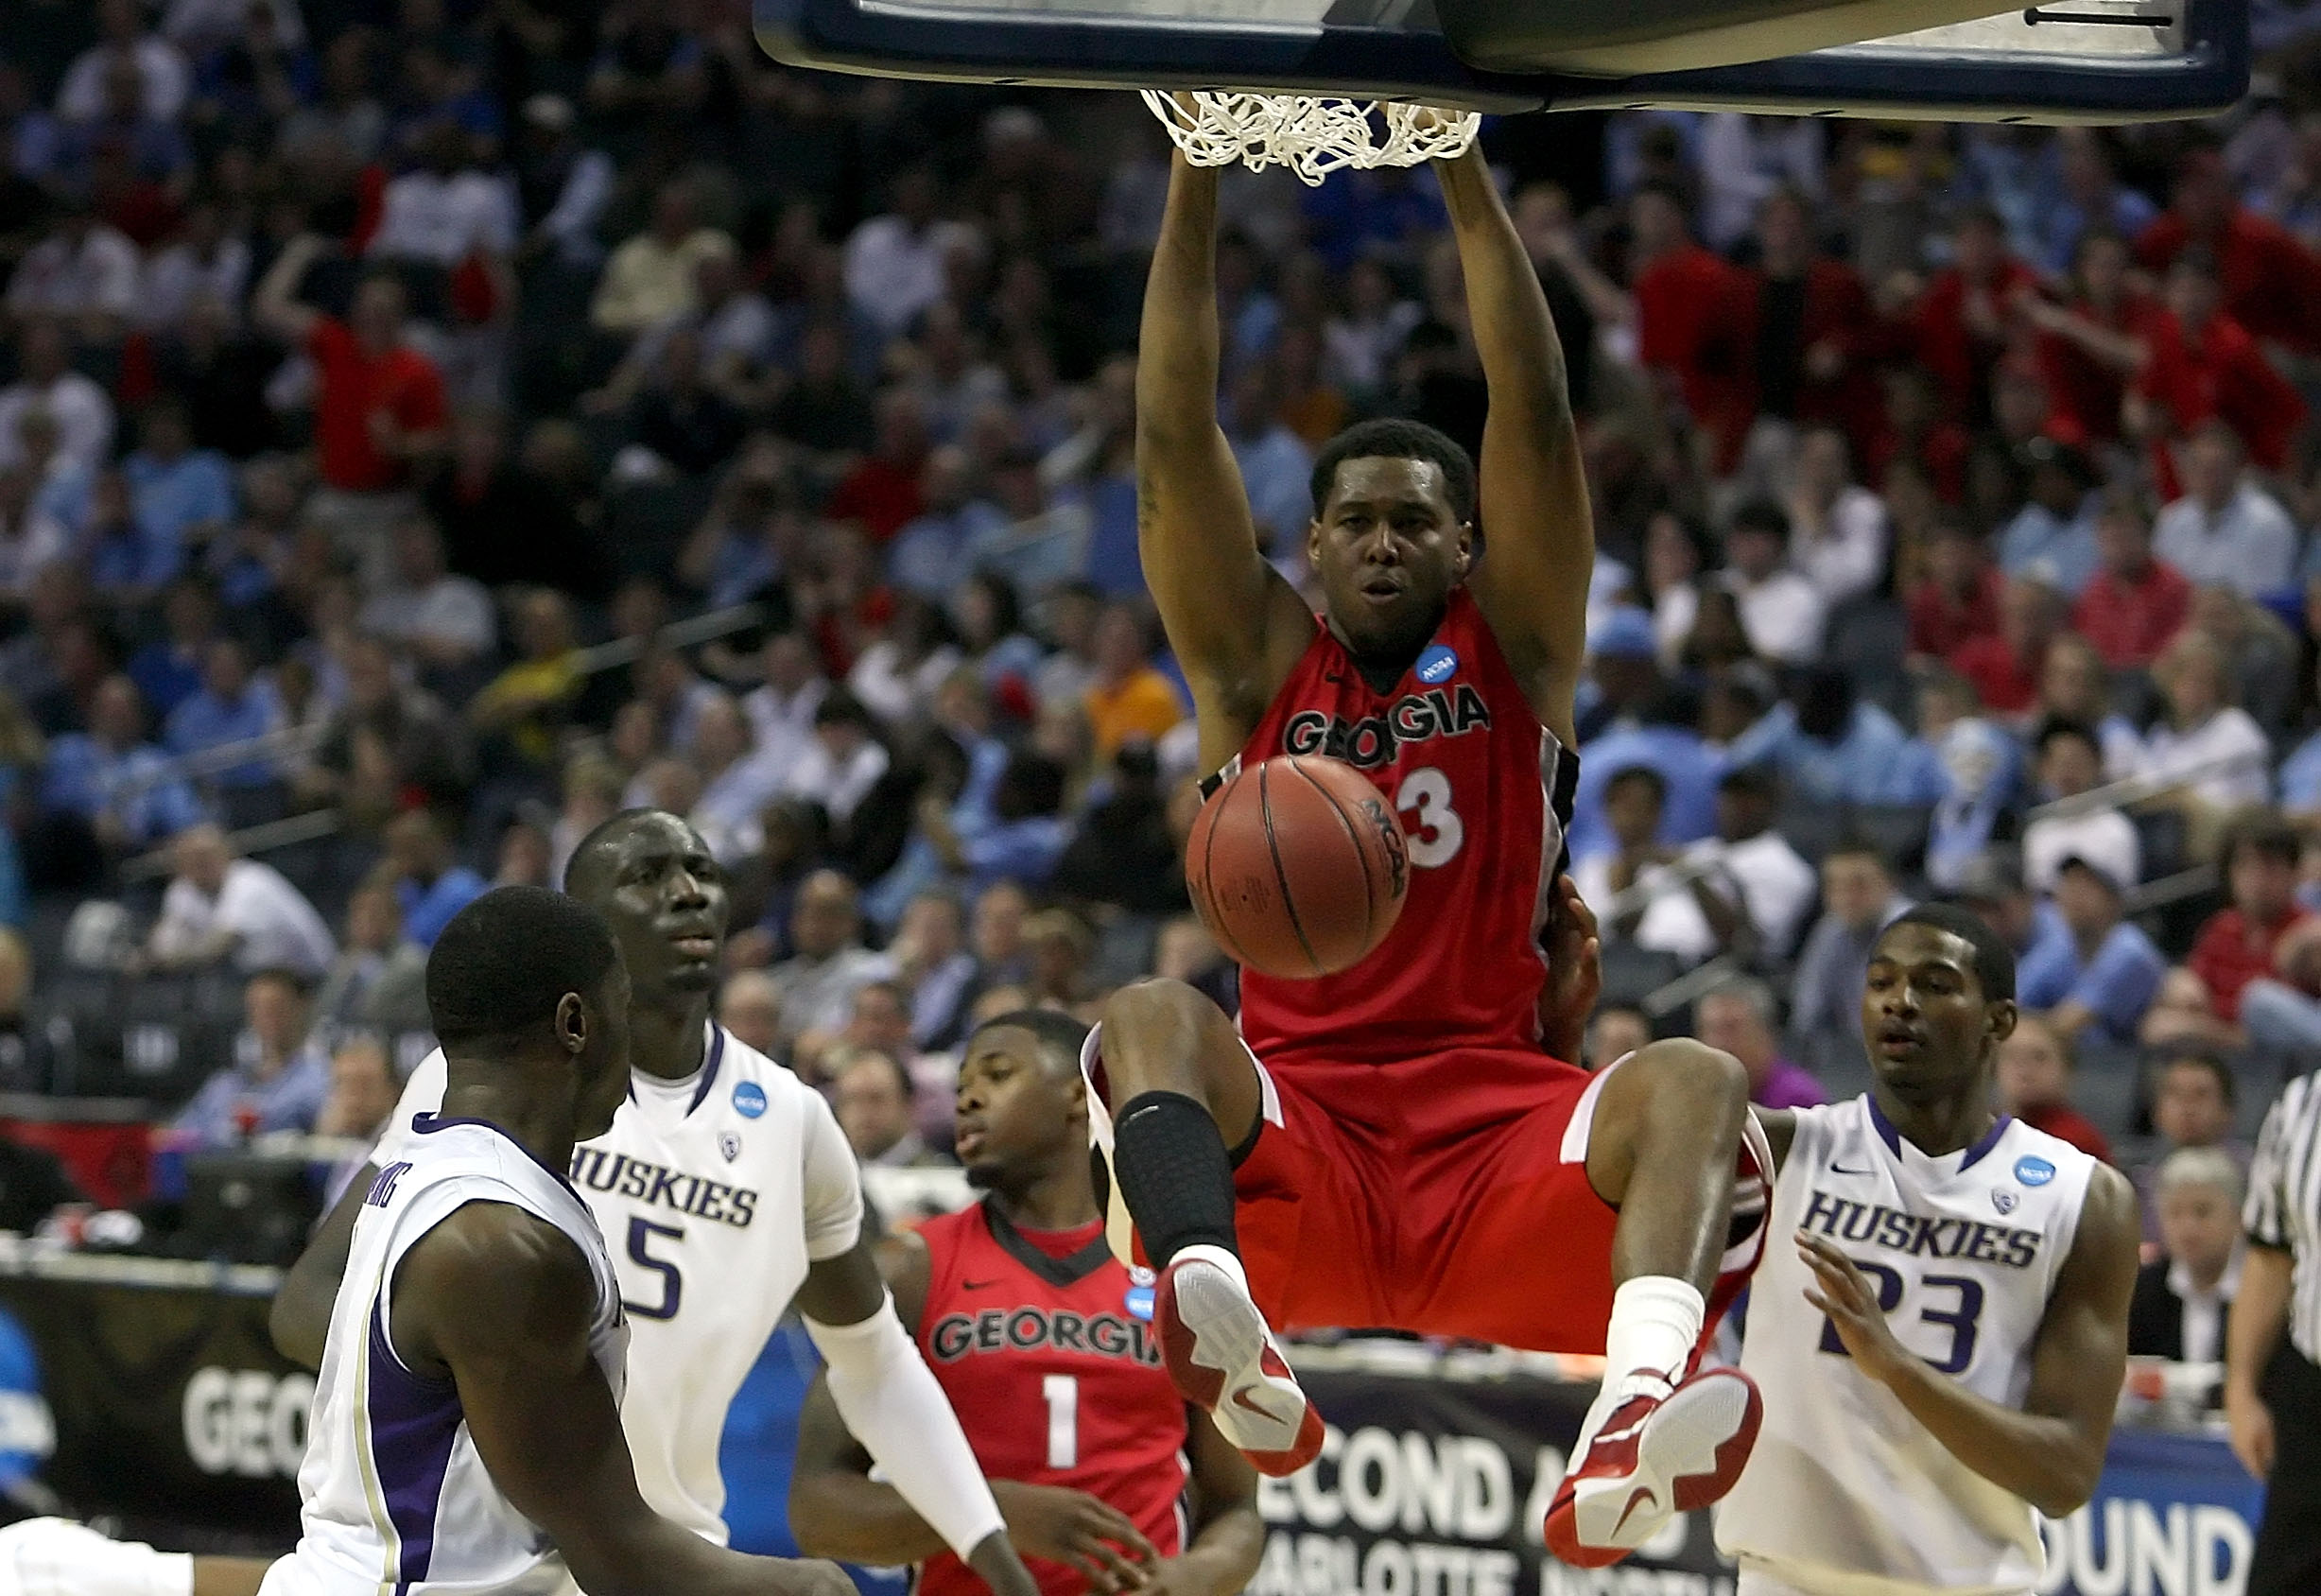 CHARLOTTE, NC - MARCH 18:  Trey Thompkins #33 of the Georgia Bulldogs dunks the ball while taking on the Washington Huskies during the second round of the 2011 NCAA men's basketball tournament at Time Warner Cable Arena on March 18, 2011 in Charlotte, Nor